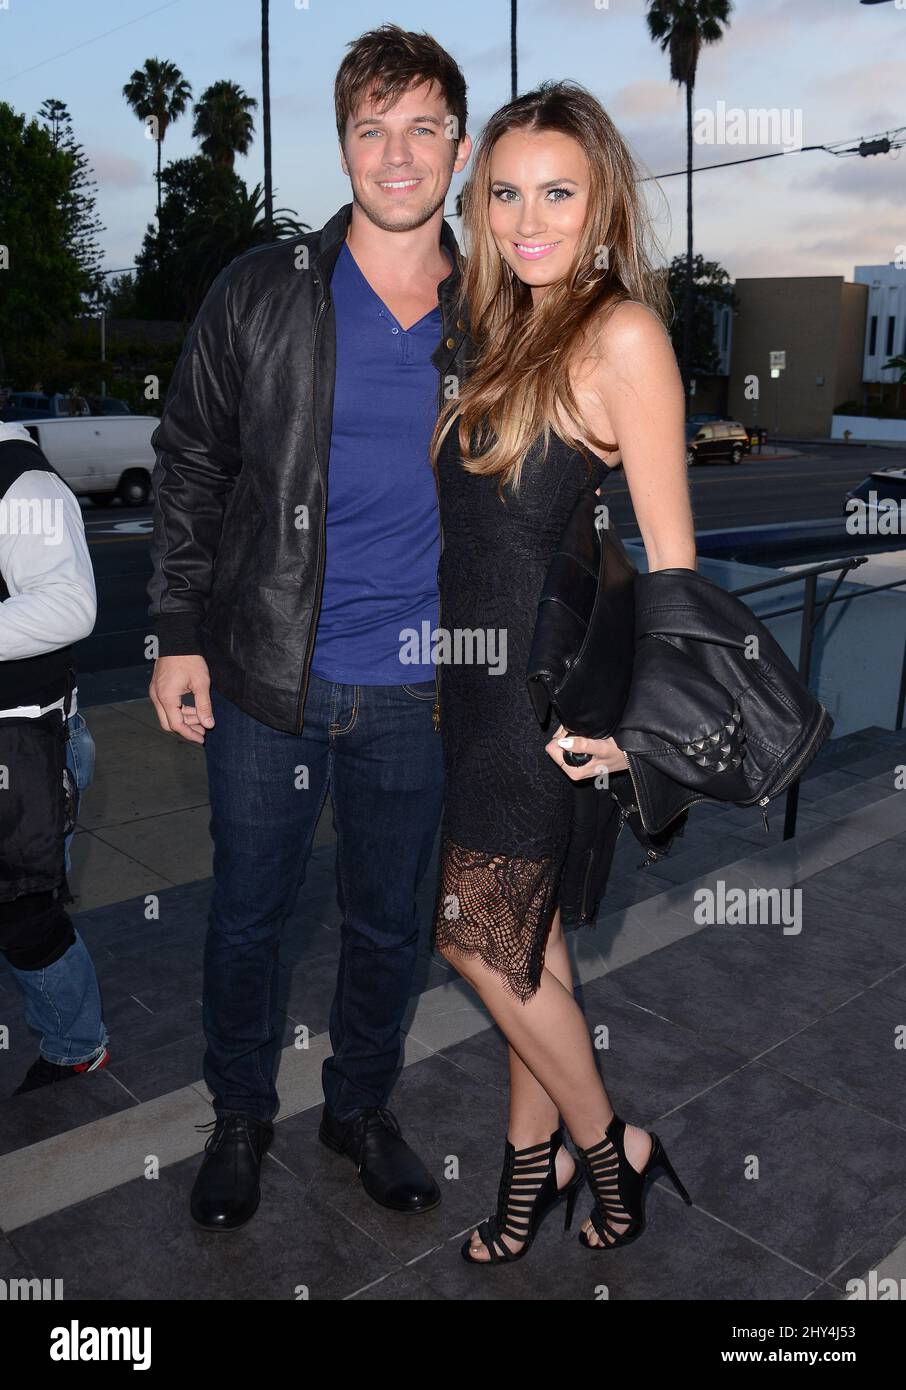 Matt Lanter, Angela Stacy attending the premiere of "I Choose" in Los Angeles, California. Stock Photo